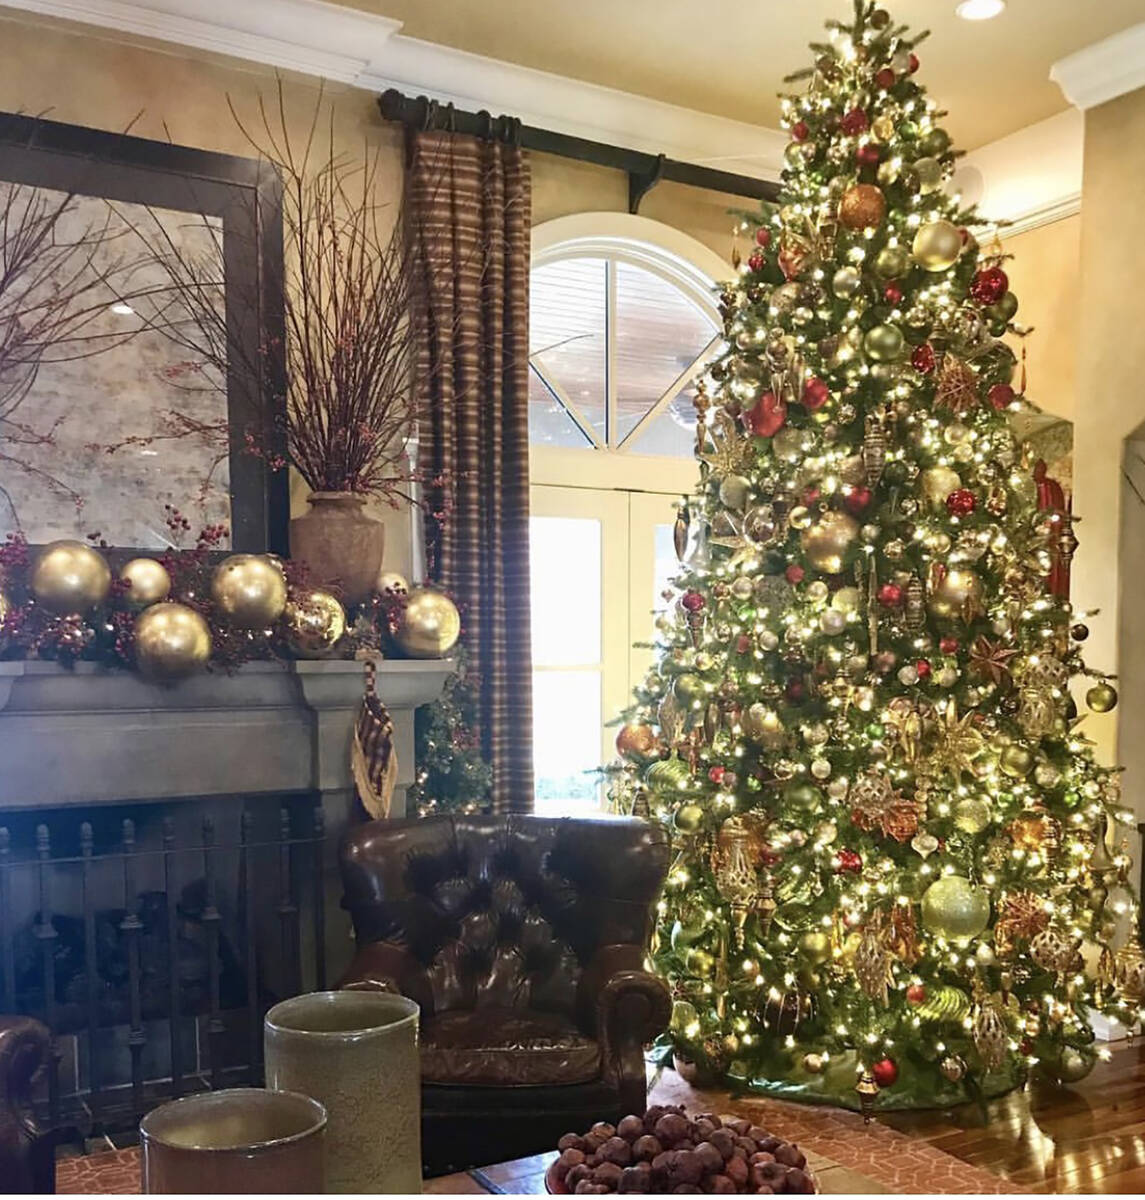 One of several Christmas trees in this luxury home. (Christopher Todd)